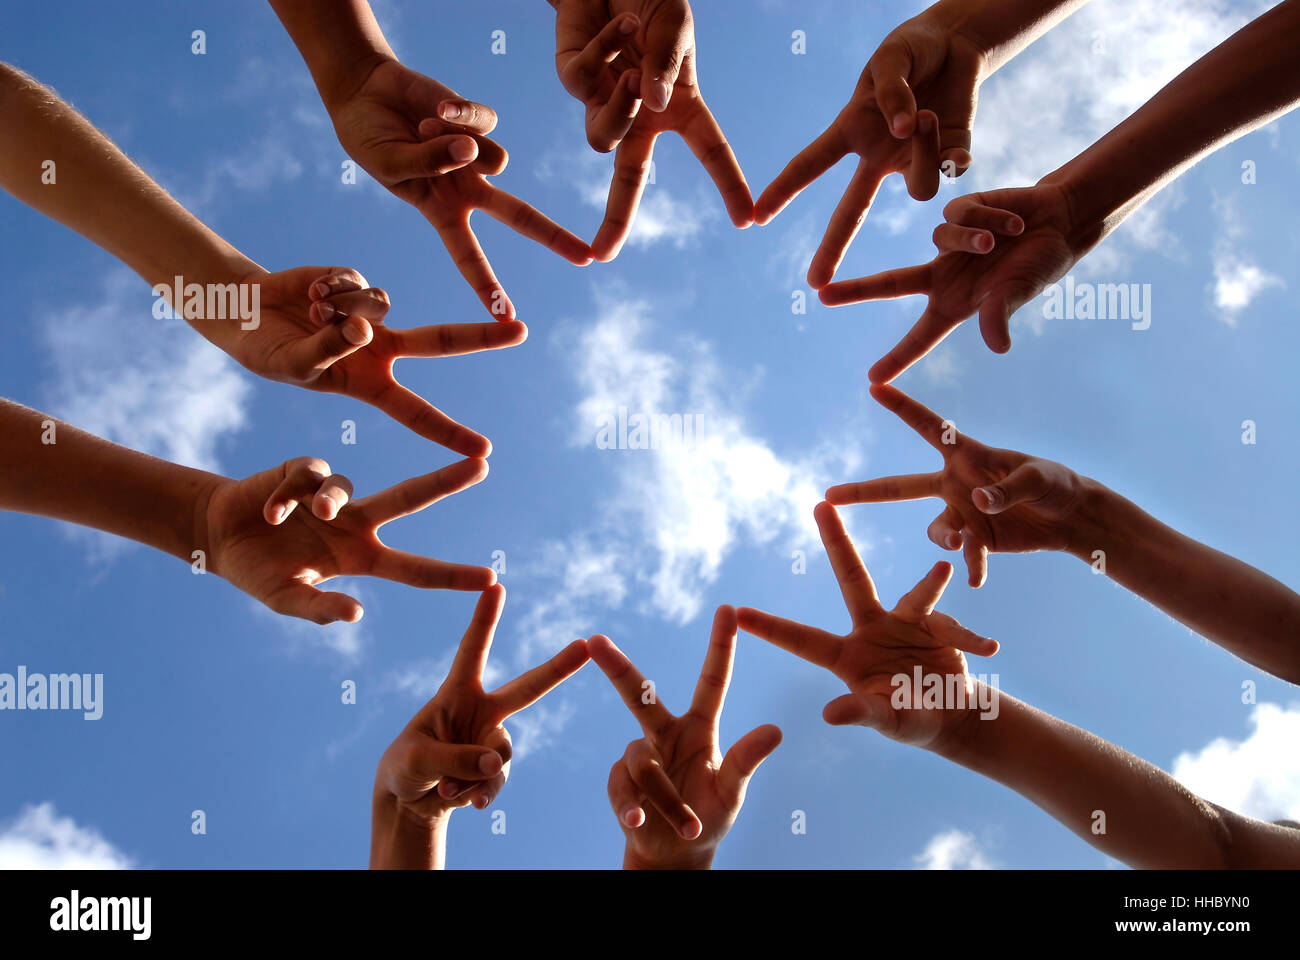 hand, hands, chain, communication, connection, connectivity, interface, Stock Photo